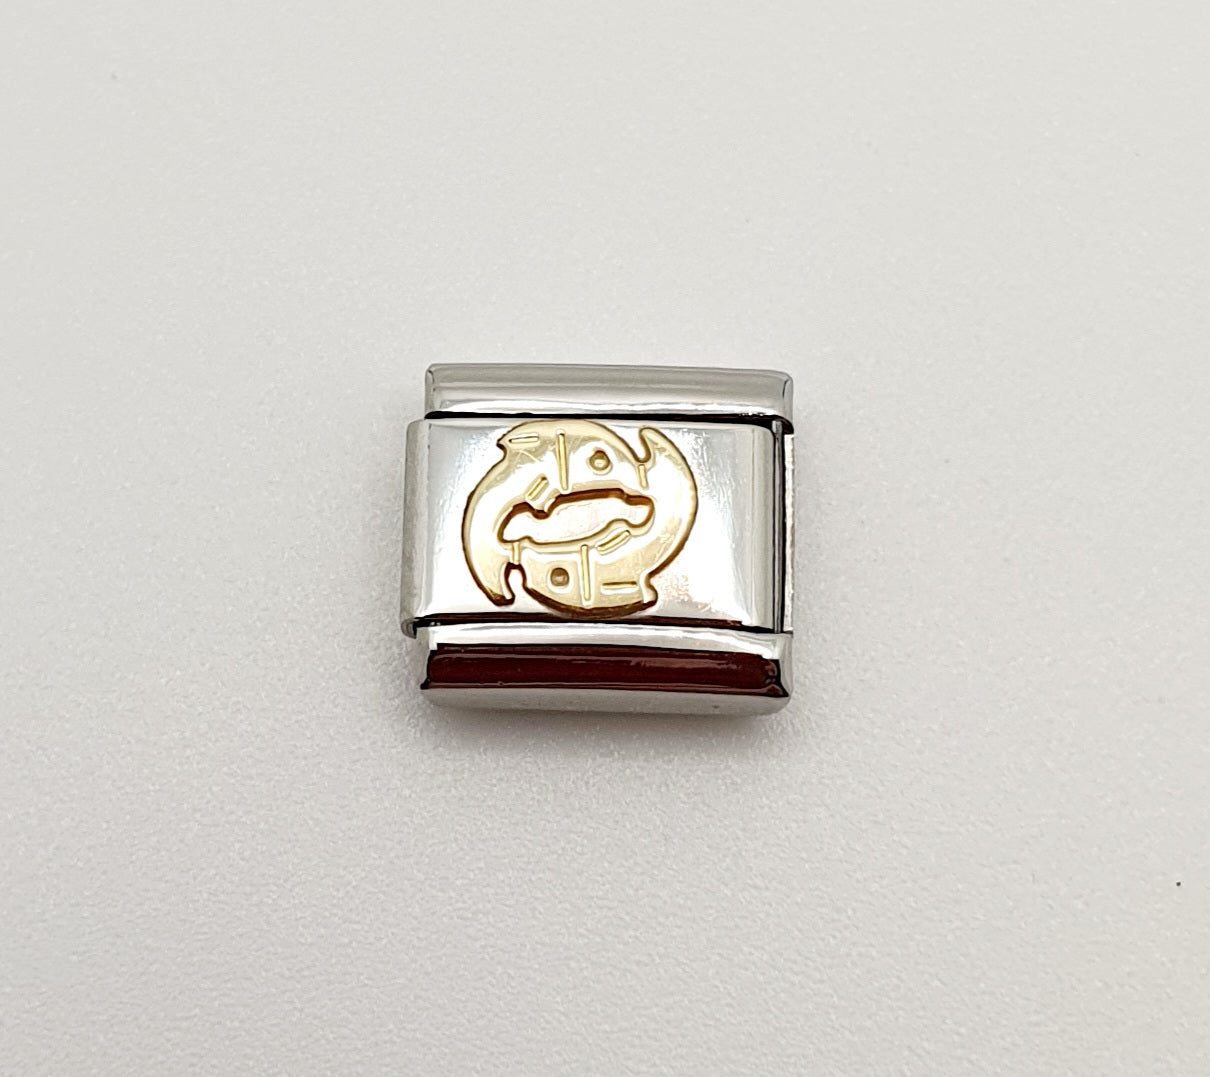 Nomination Charm Link "Pisces" Stainless Steel with 18k Gold Plate, 0300104 12